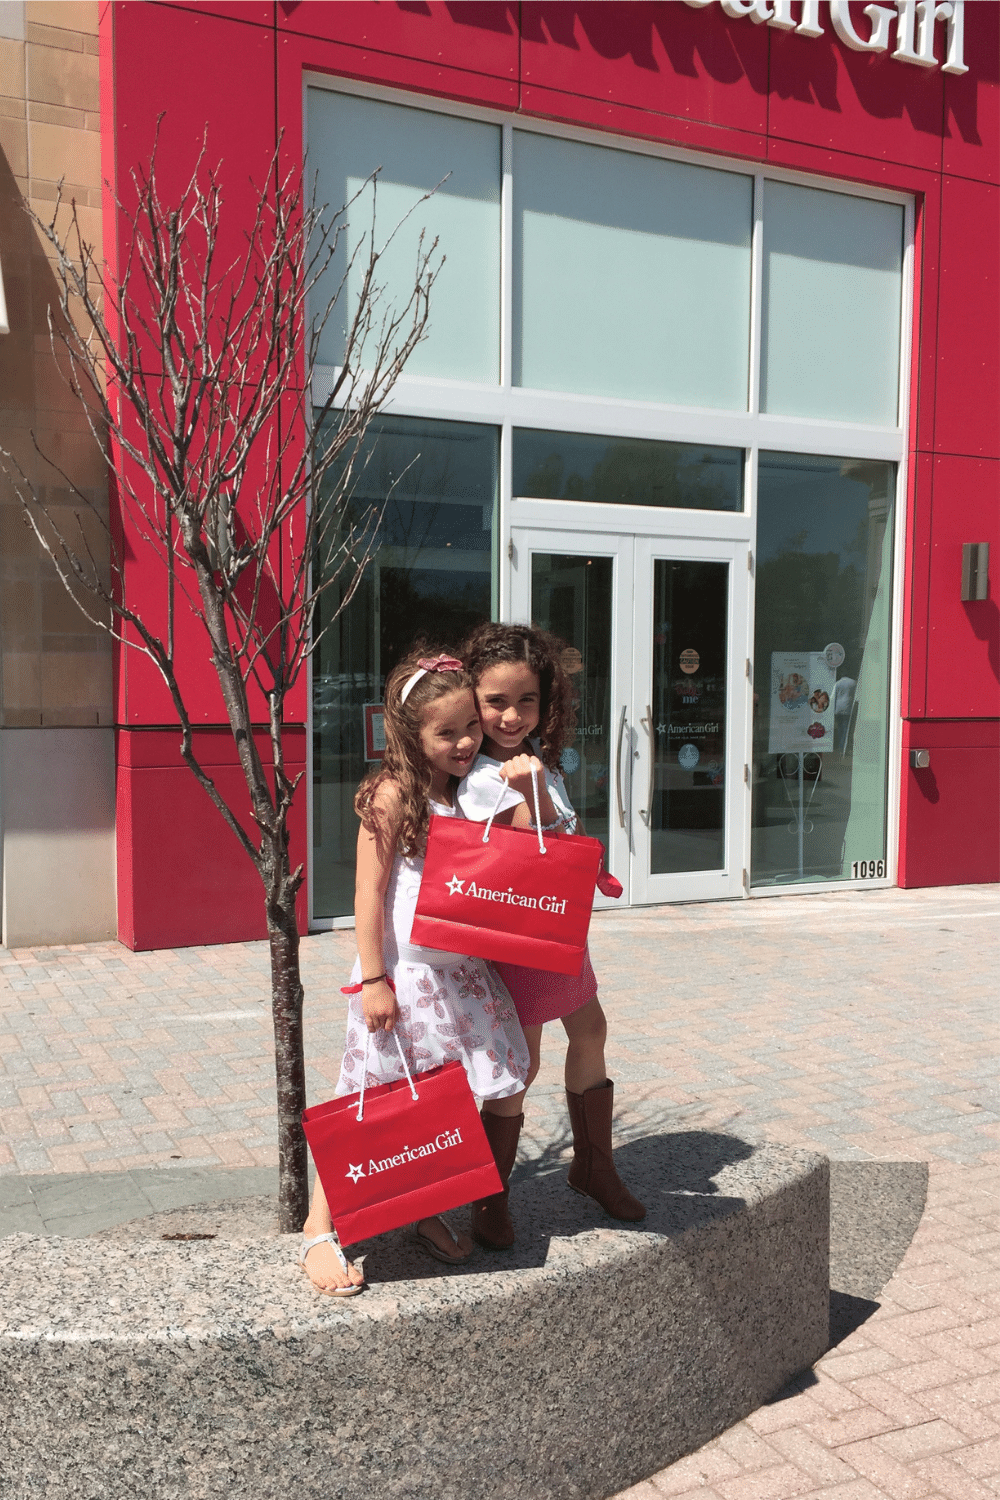 The American Girl Store Experience – Tips for Visiting an American Girl Doll Store